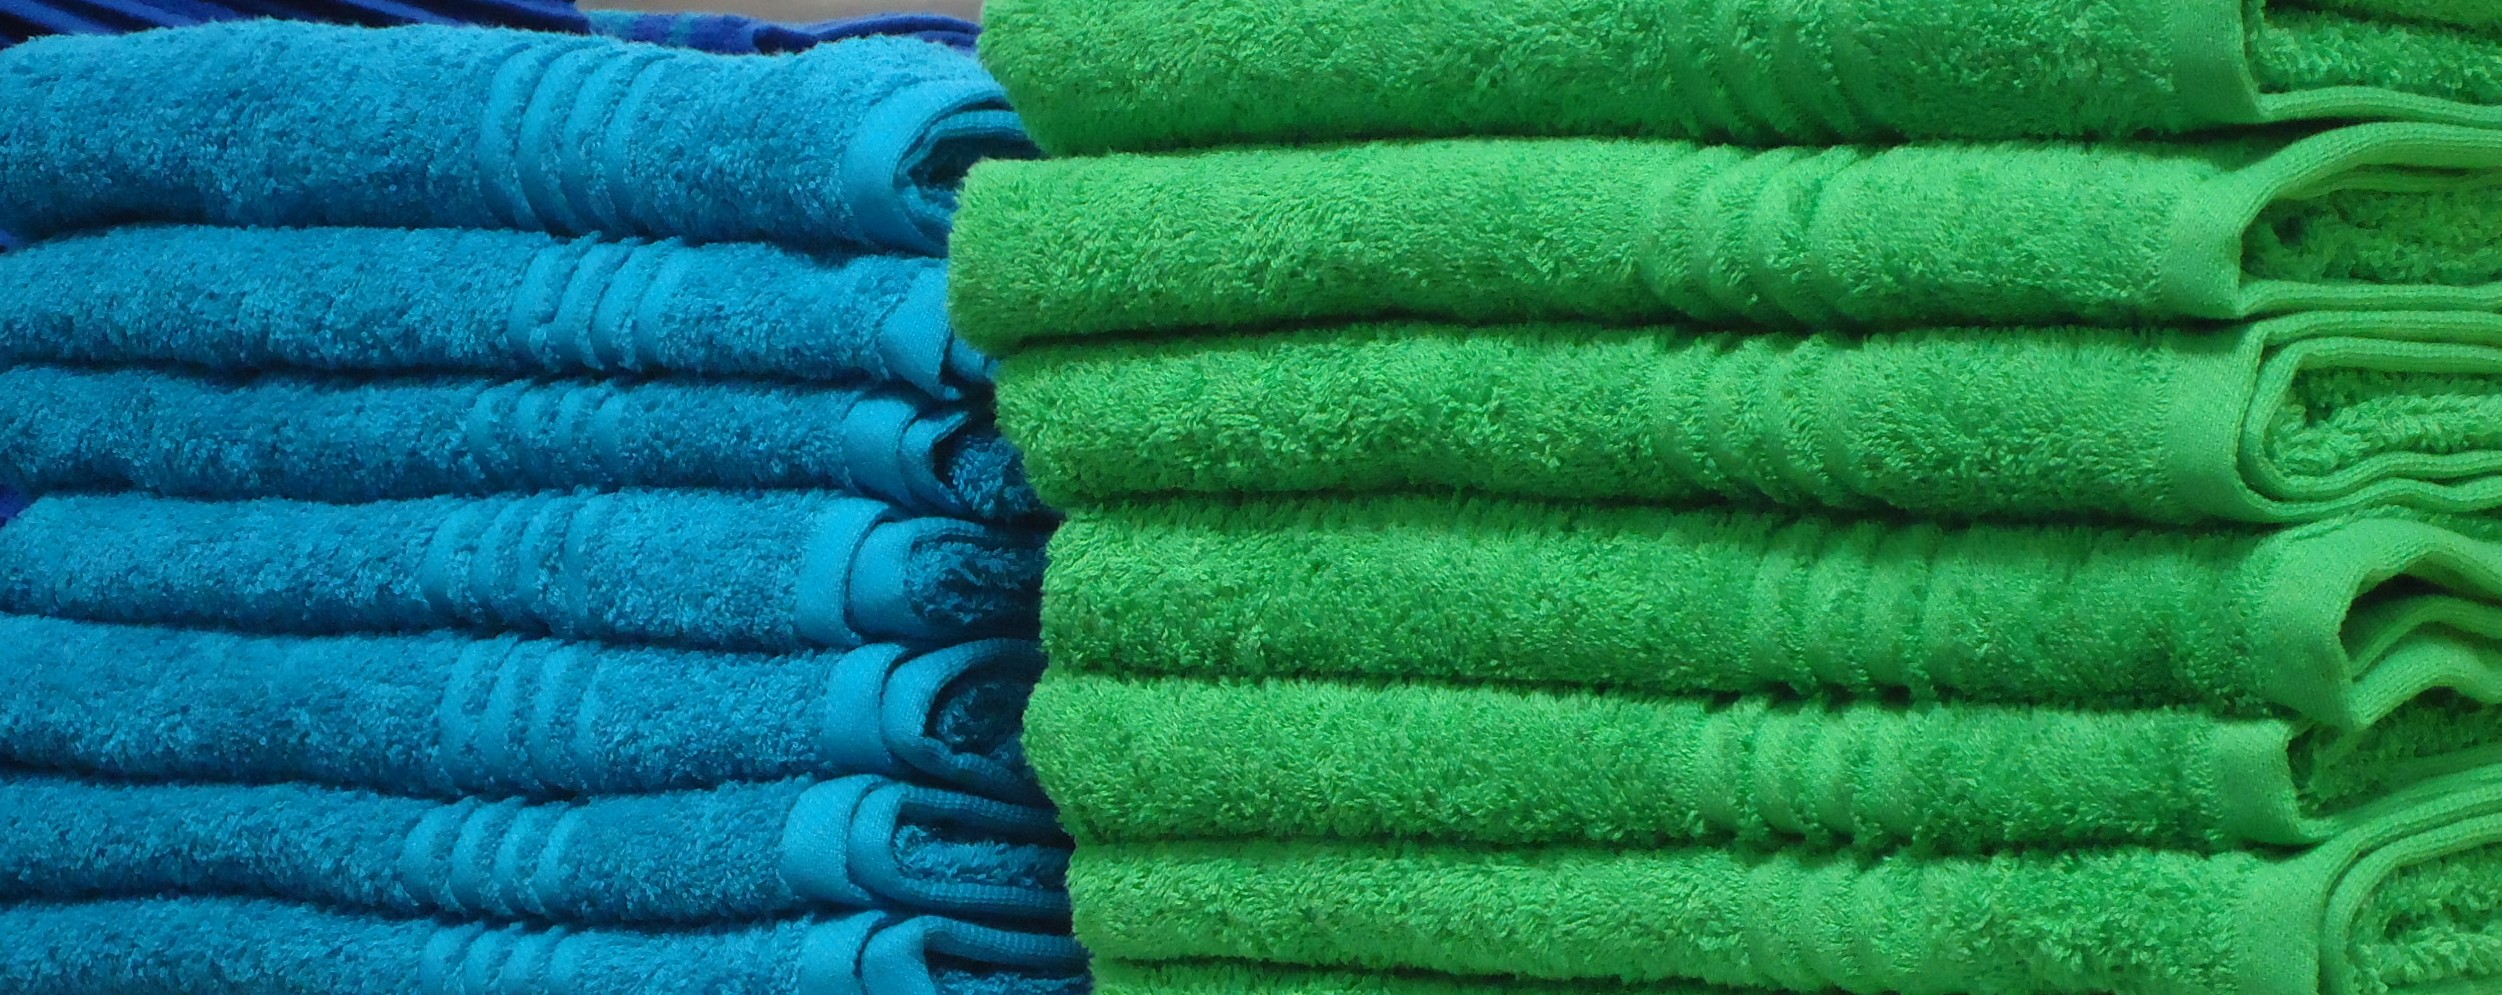 Blue_and_green_towels_on_a_shelf_in_a_store_in_New_Jersey